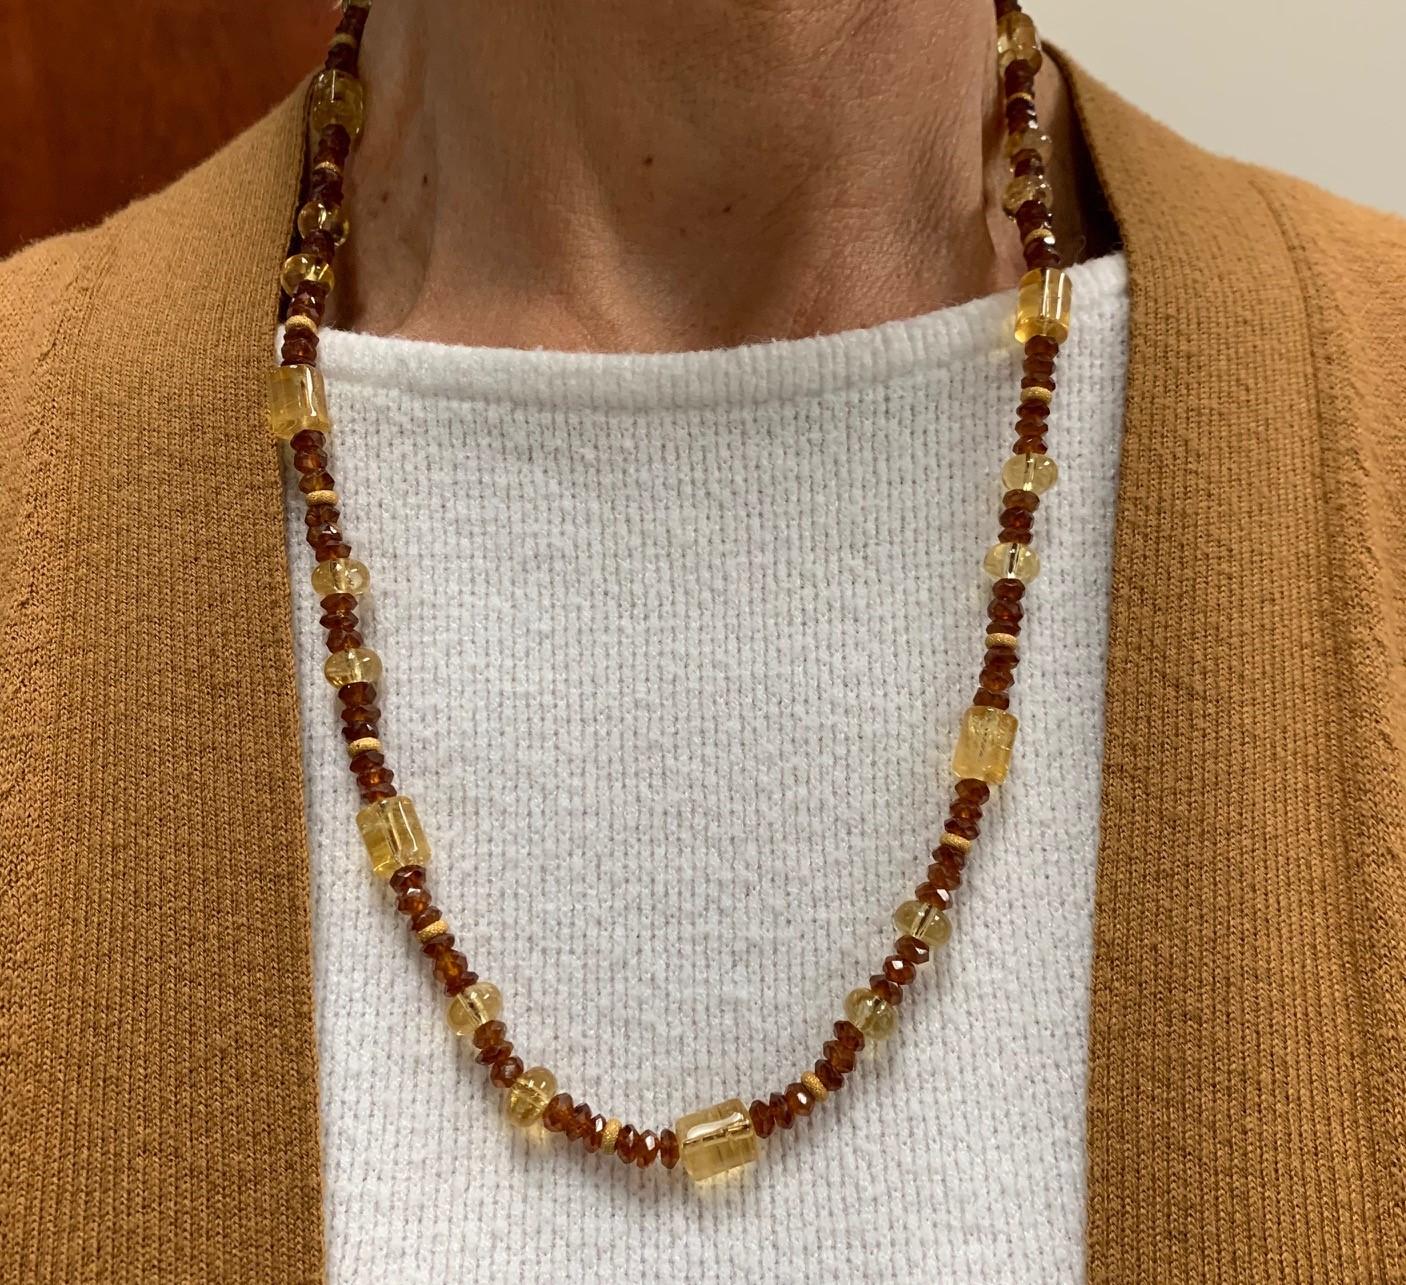 Garnet and Citrine Beaded Necklace with 14k Yellow Gold Accents 1